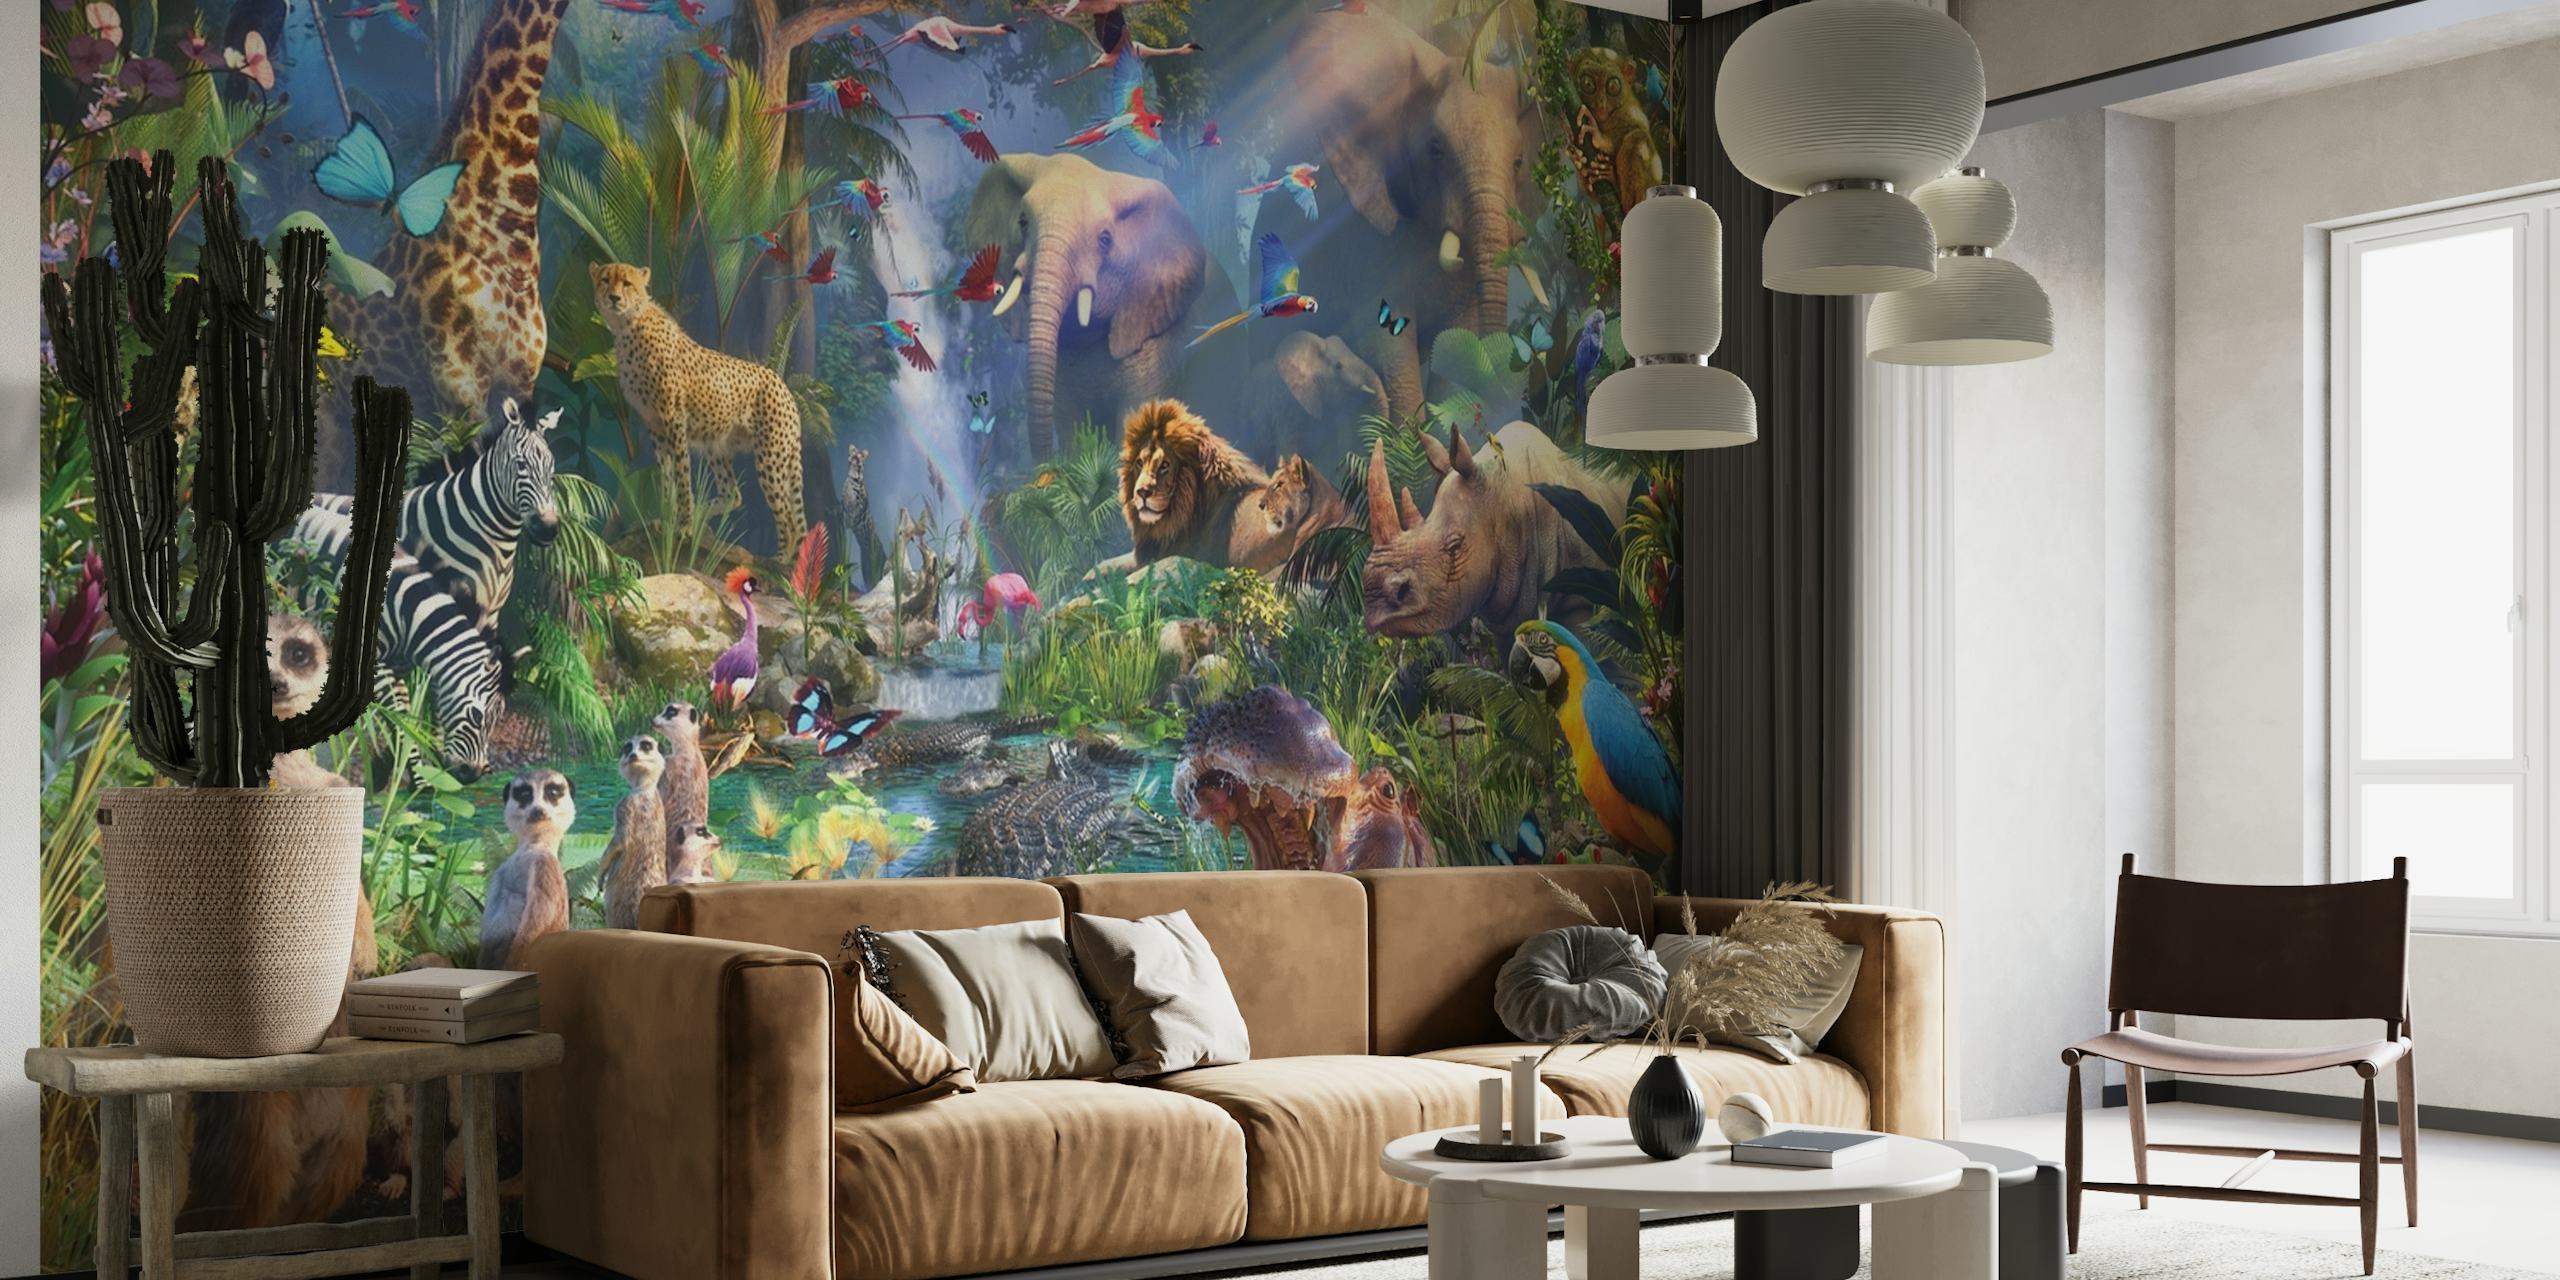 Tropical jungle wall mural featuring vibrant wildlife and lush greenery